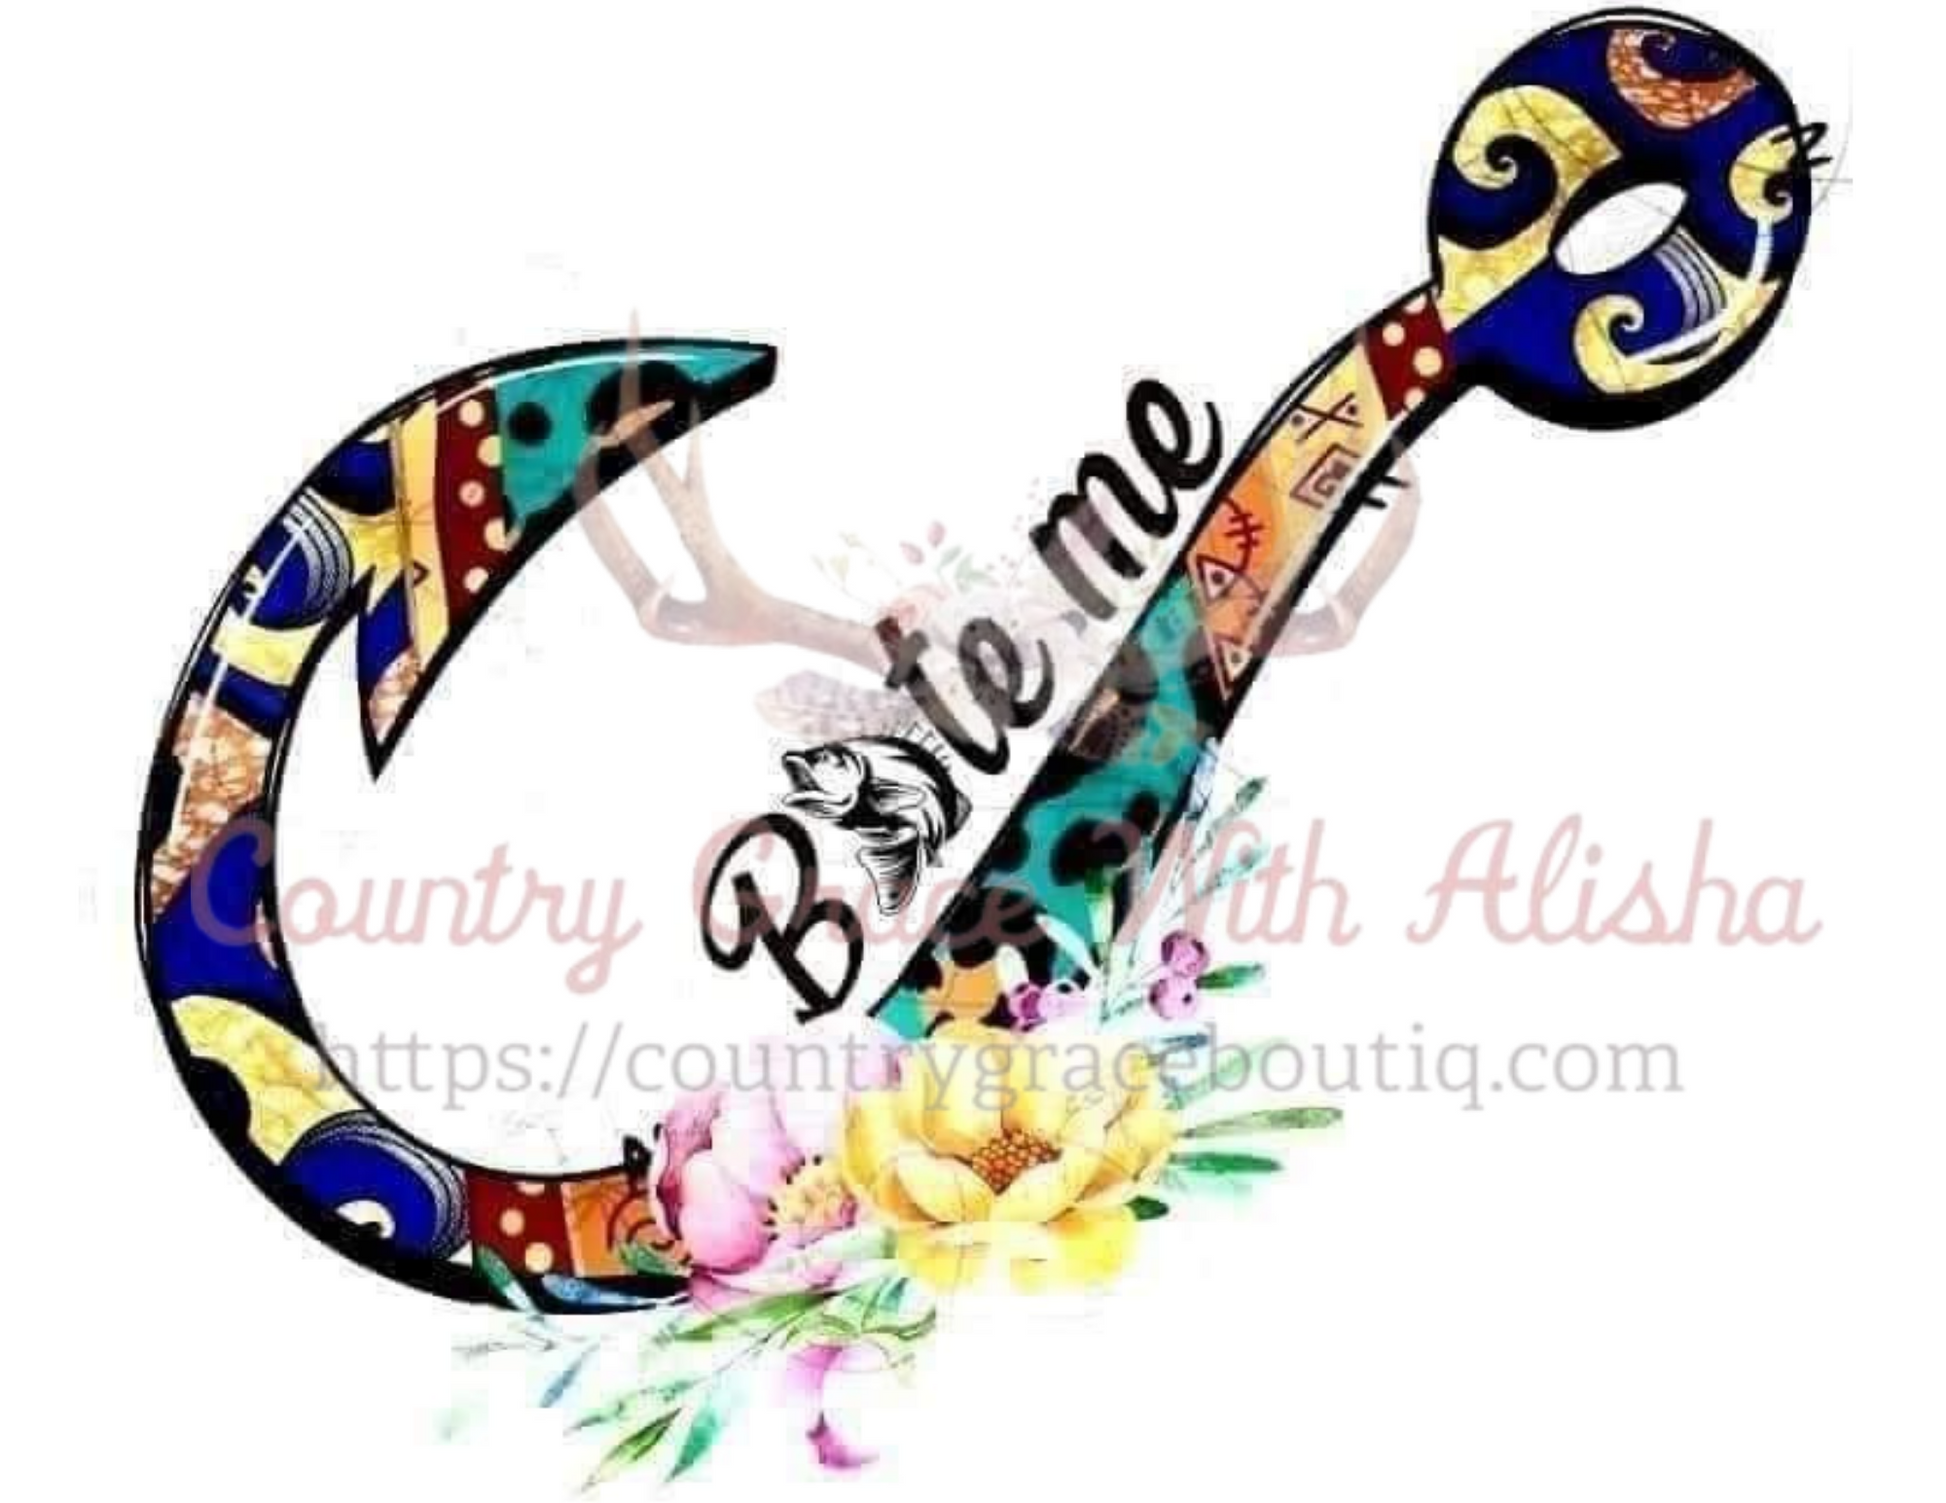 Country Grace With Alisha - Bite Me Fish Hook Ready To Press Sublimation  Transfer